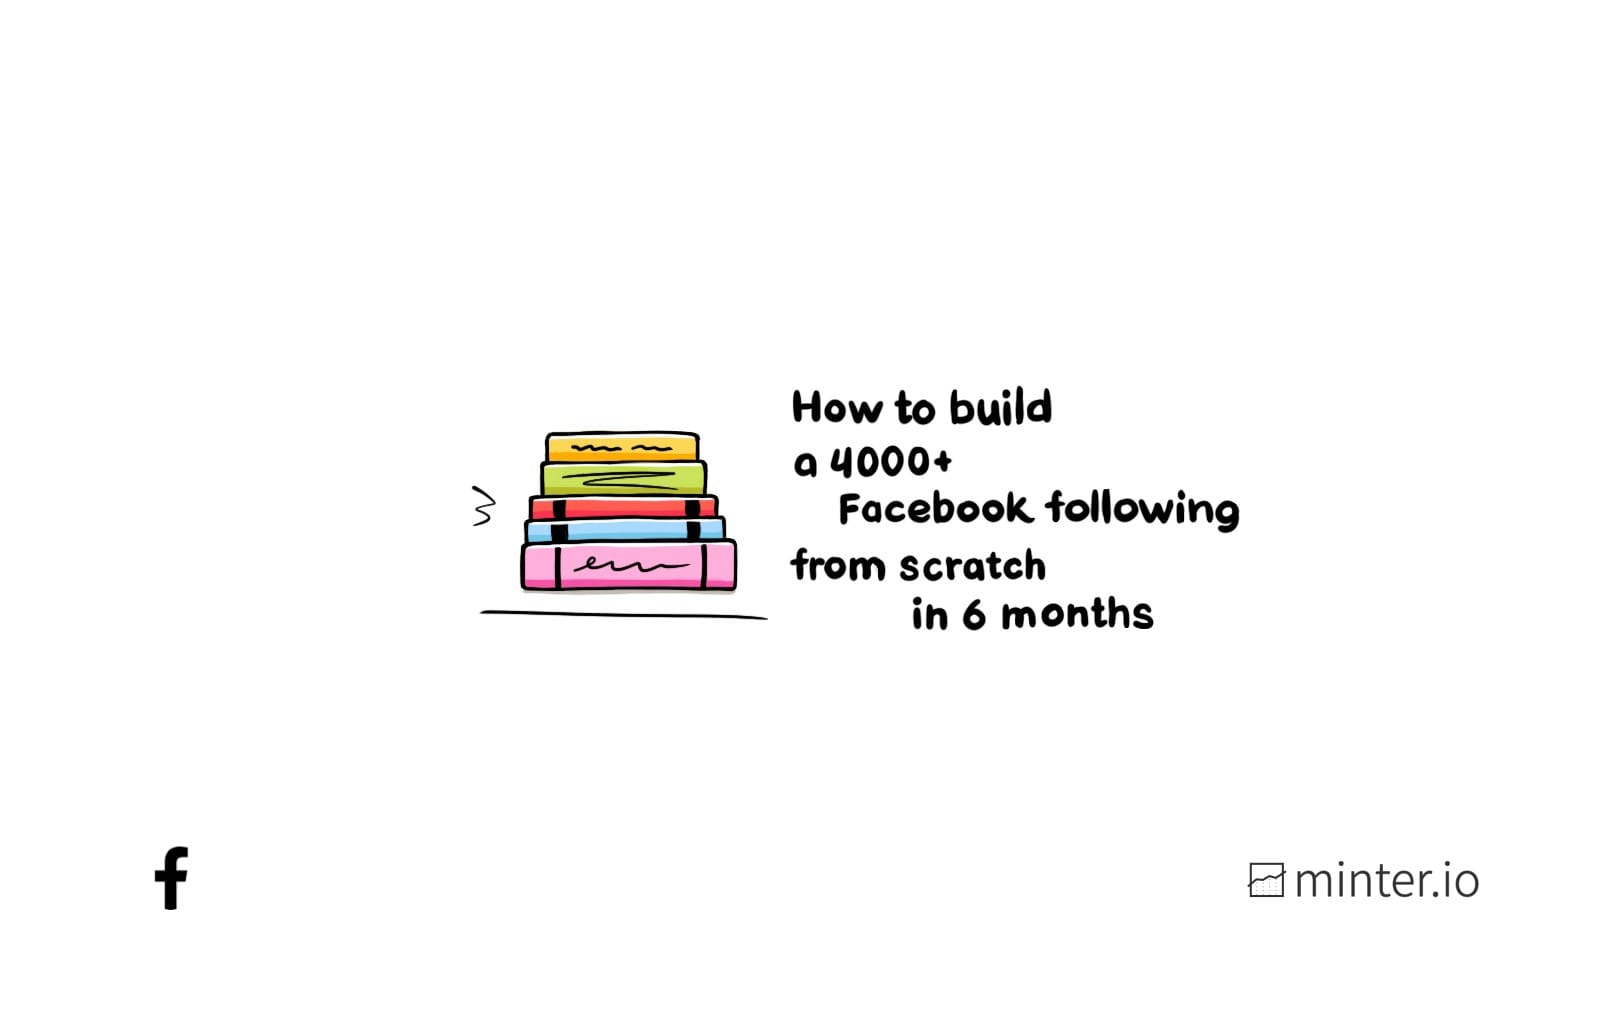 How to build a 4000+ Facebook following from scratch in 6 months